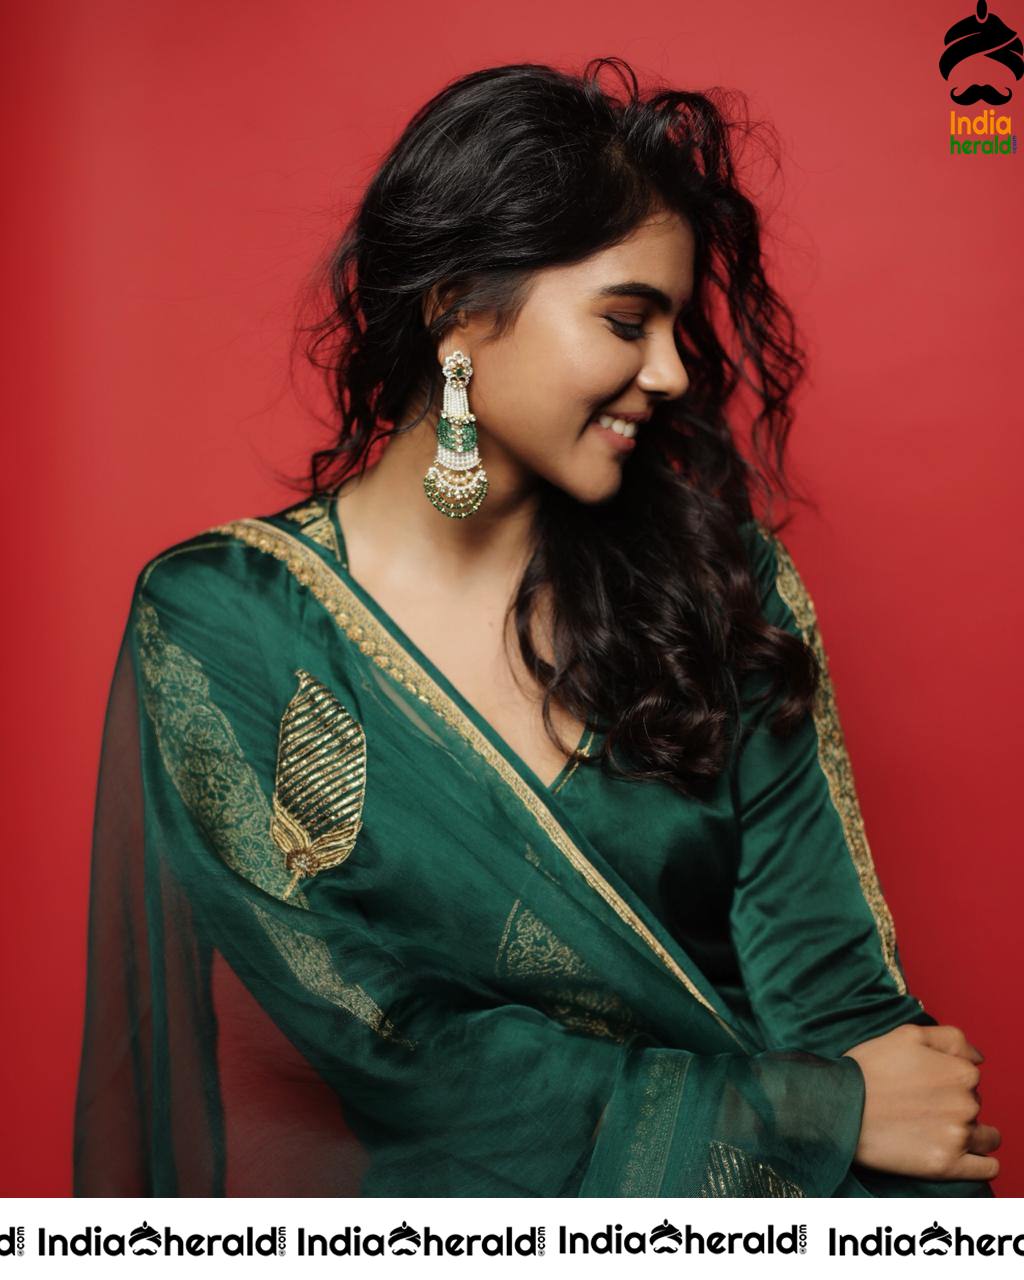 Kalyani Priyadarshan Seduces with her Beauty and Flawless SMile